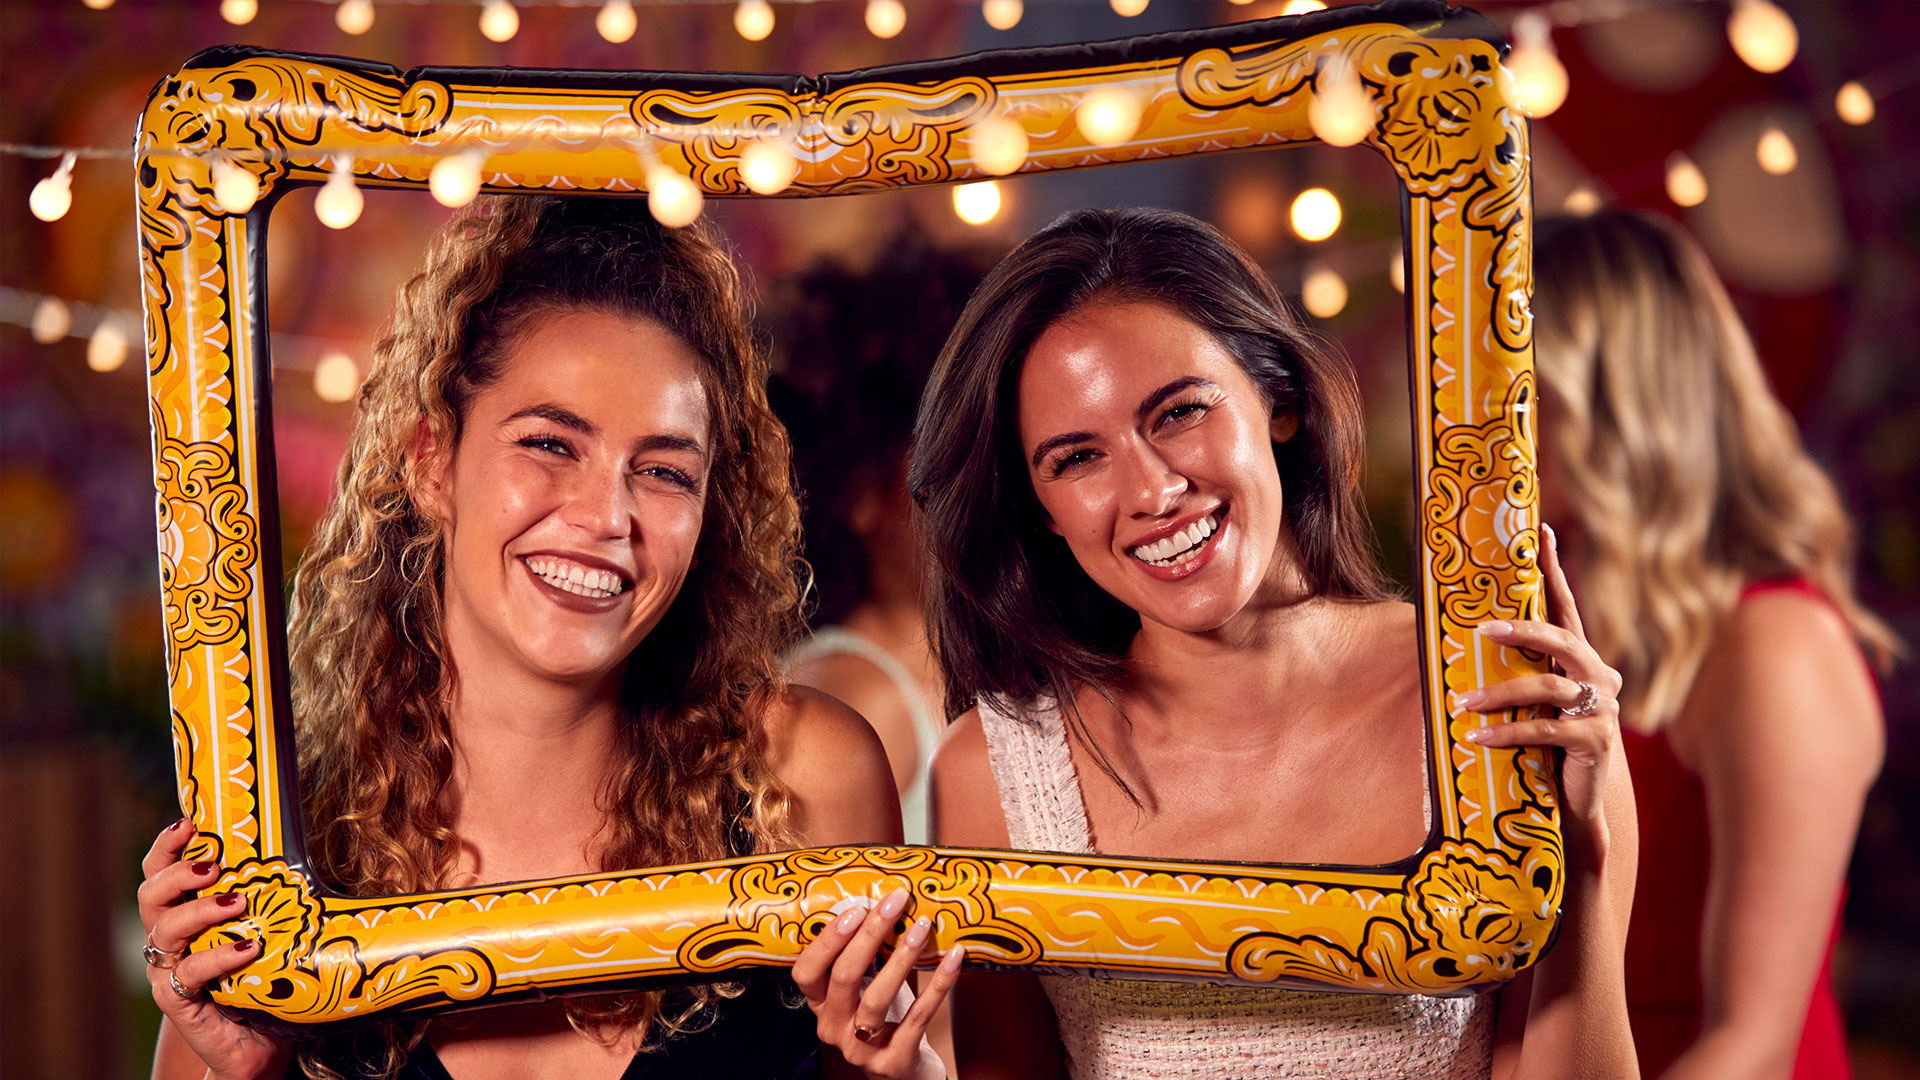 two young women posing for a fun photo inside a picture frame prop